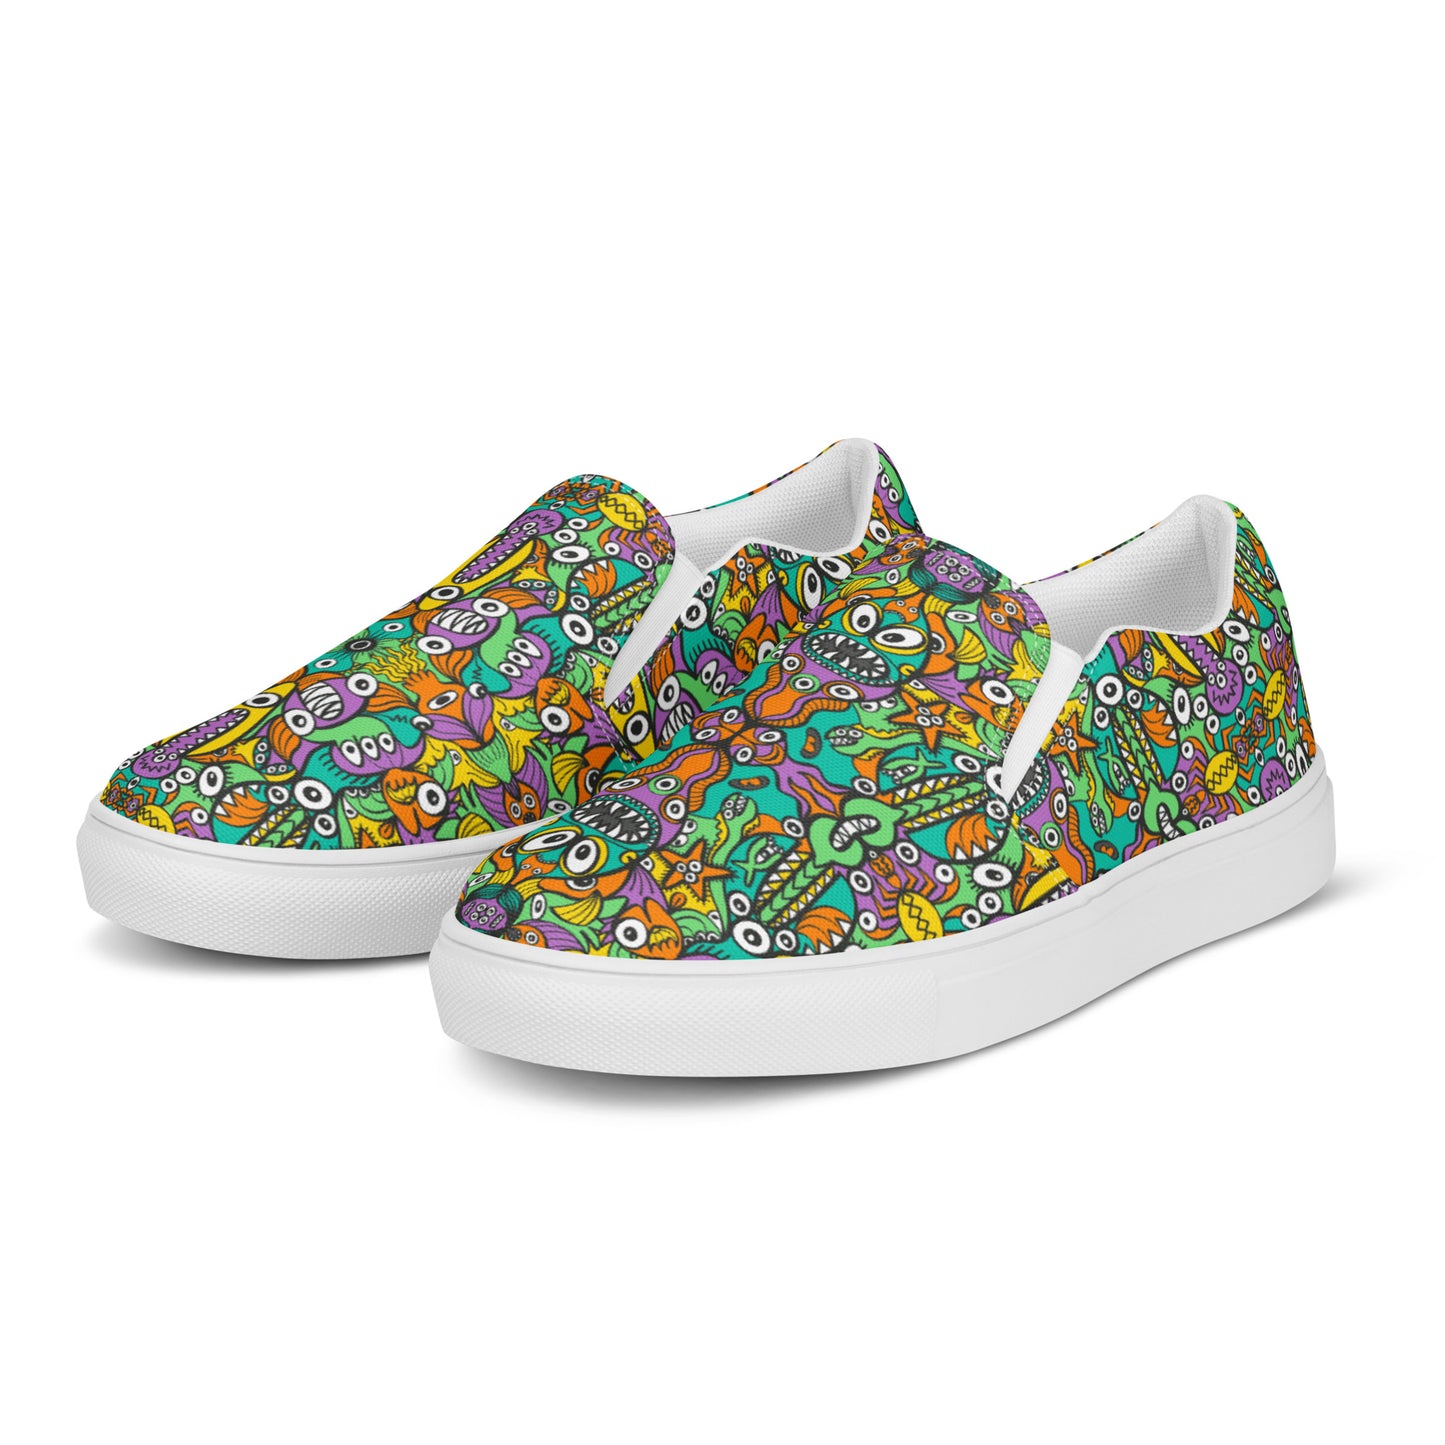 The vast ocean is full of doodle critters Men’s slip-on canvas shoes. Overview